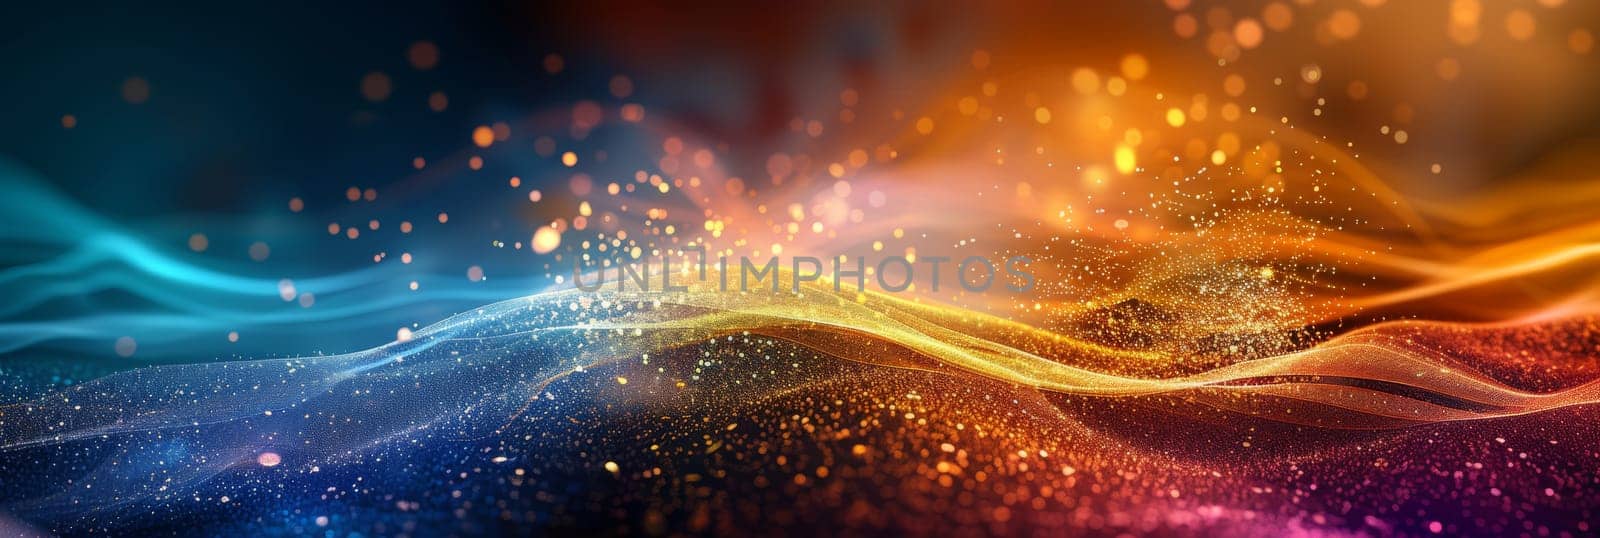 A colorful, abstract image of a wave with a lot of sparkles by AI generated image.